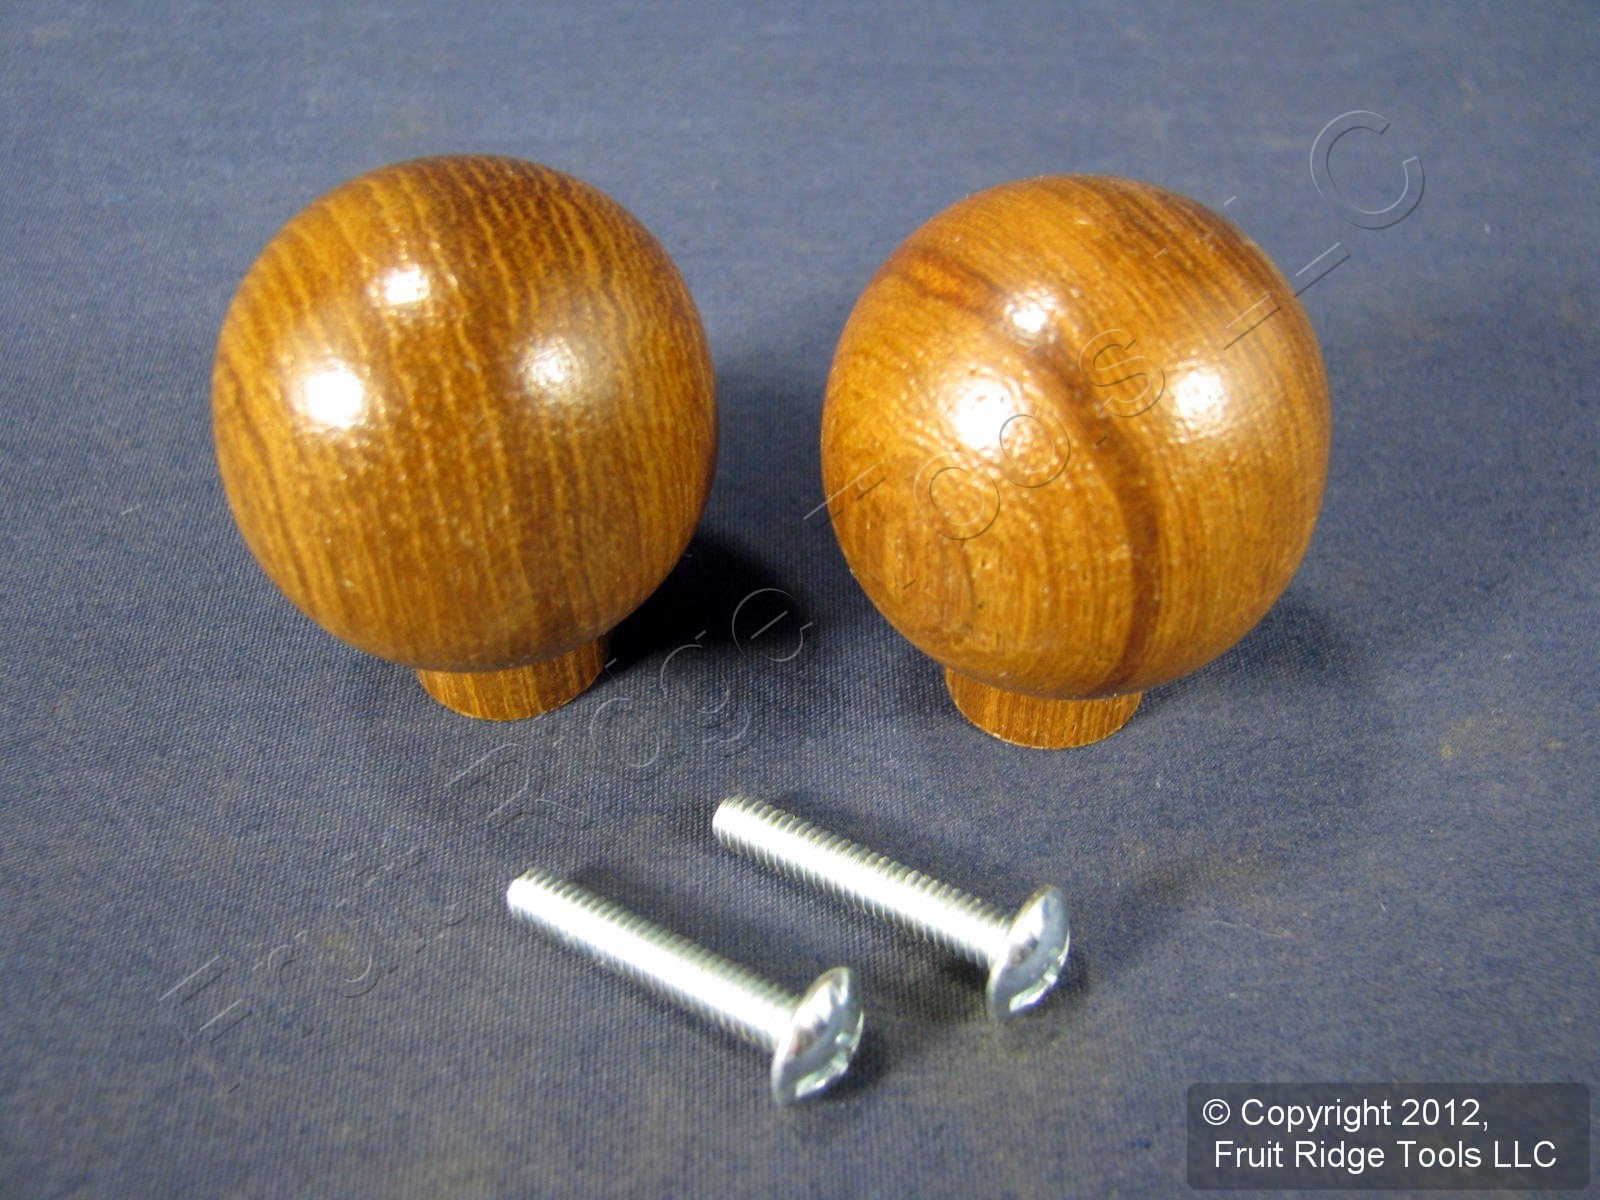 2 Brainerd 13/8" Rounded Ball Solid Teak Drawer Handle Wood